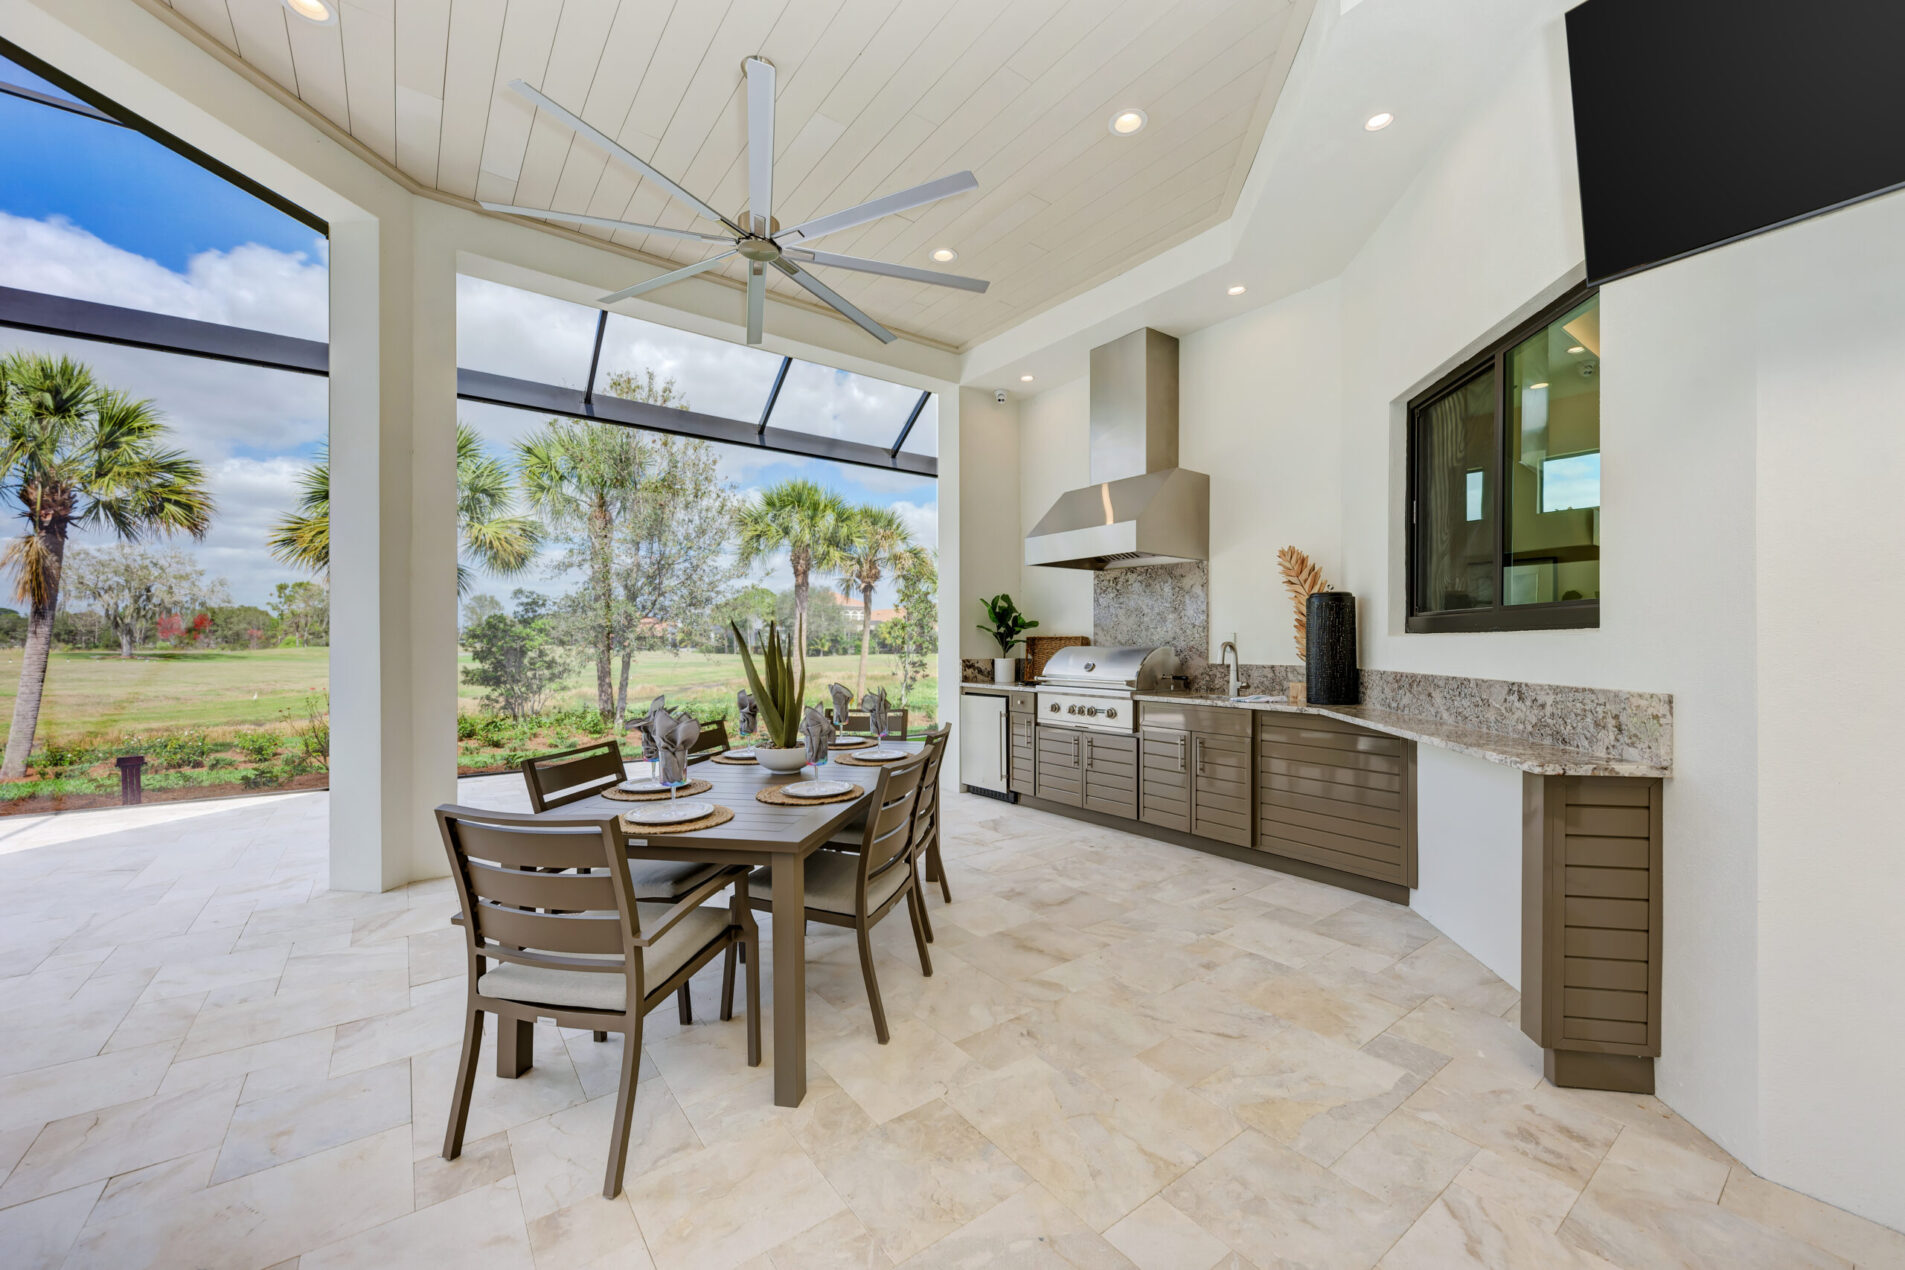 Turnberry Model home Outdoor Kitchen Design for Florida’s Year-Round ‘Grilling Season’